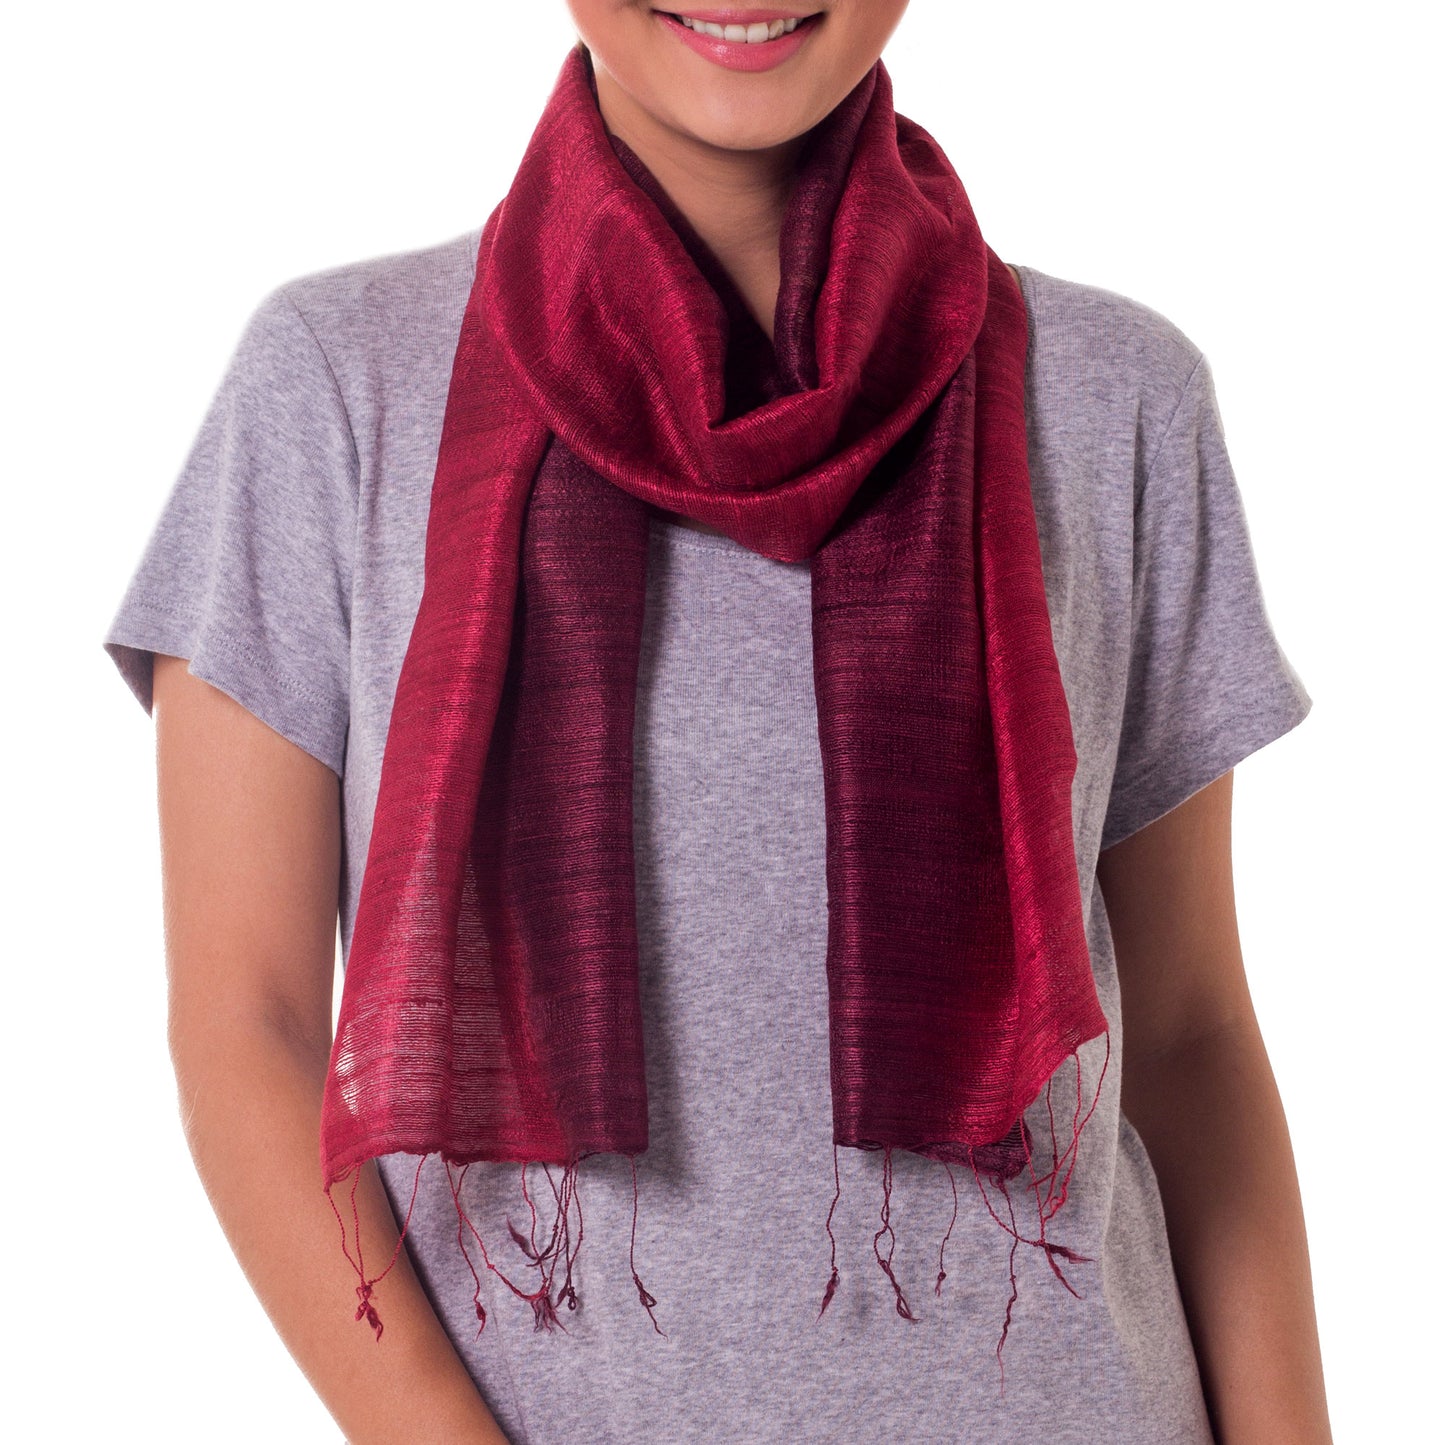 Roses & Red Wine Ombre Silk Scarf